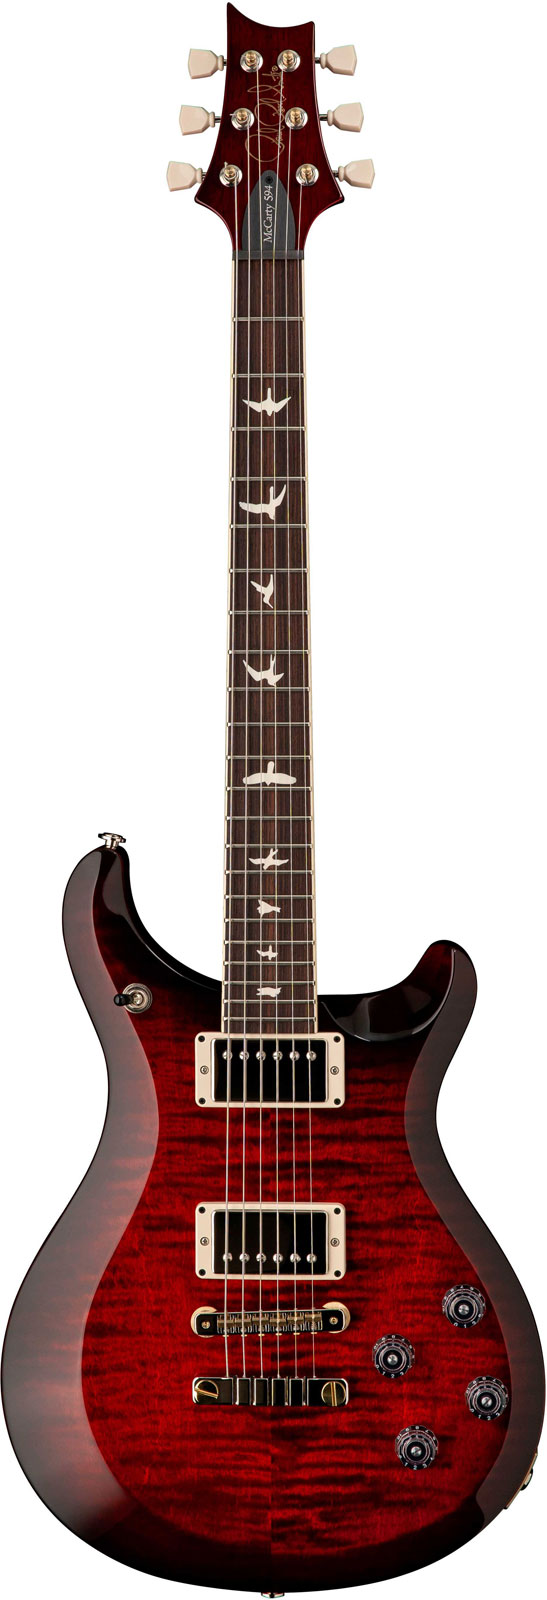 PRS - PAUL REED SMITH S2 MCCARTY 594 FIRE RED BURST - OCCASION